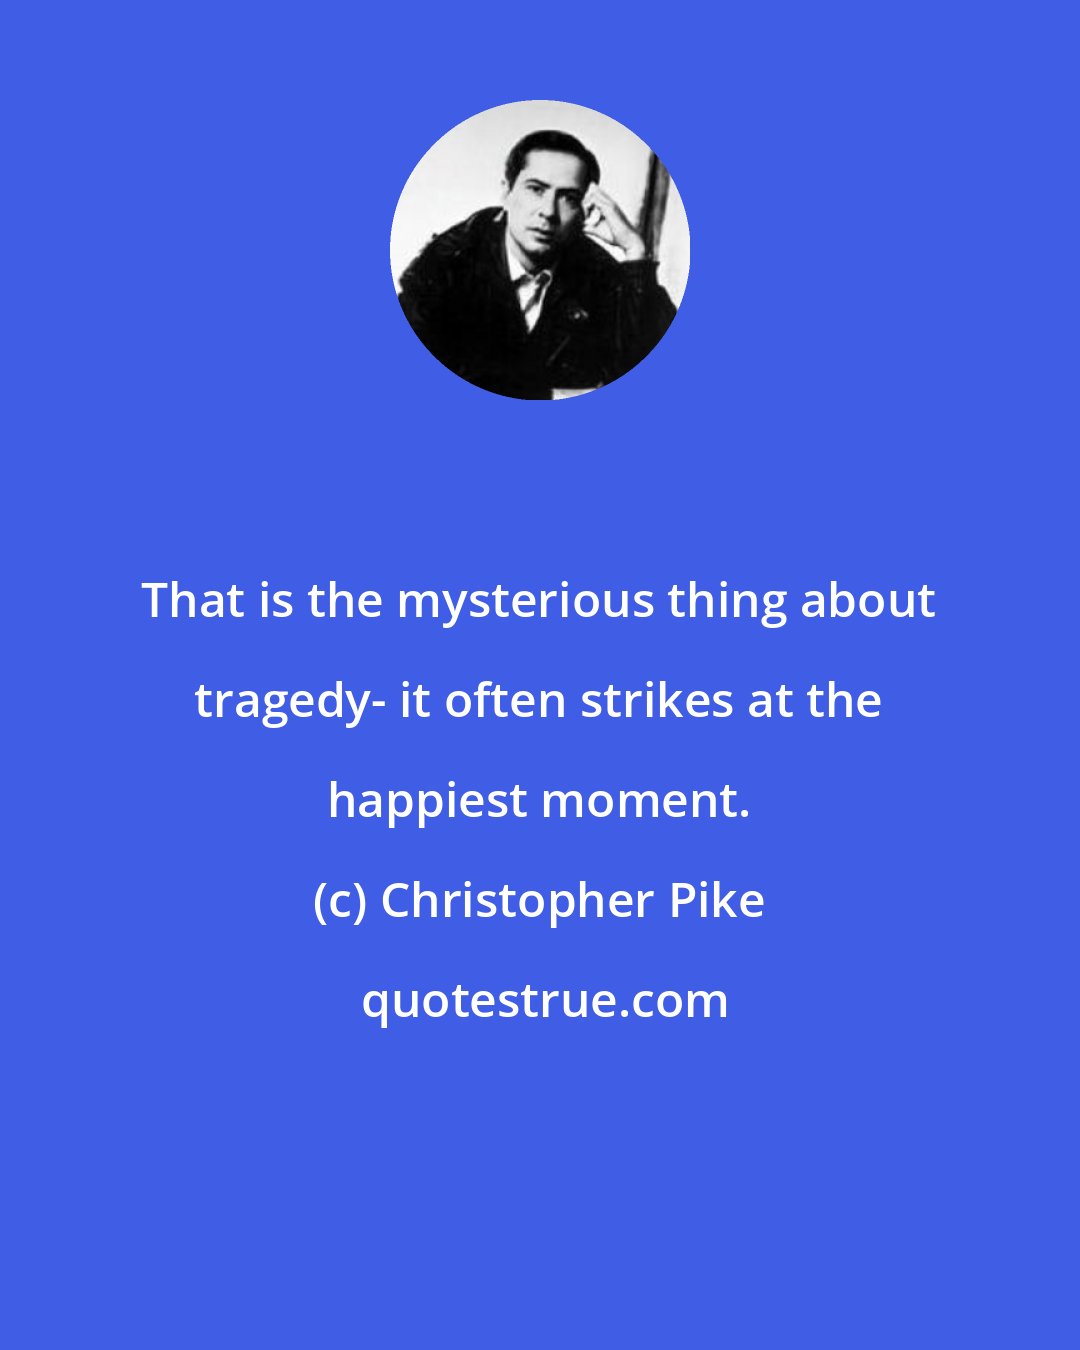 Christopher Pike: That is the mysterious thing about tragedy- it often strikes at the happiest moment.